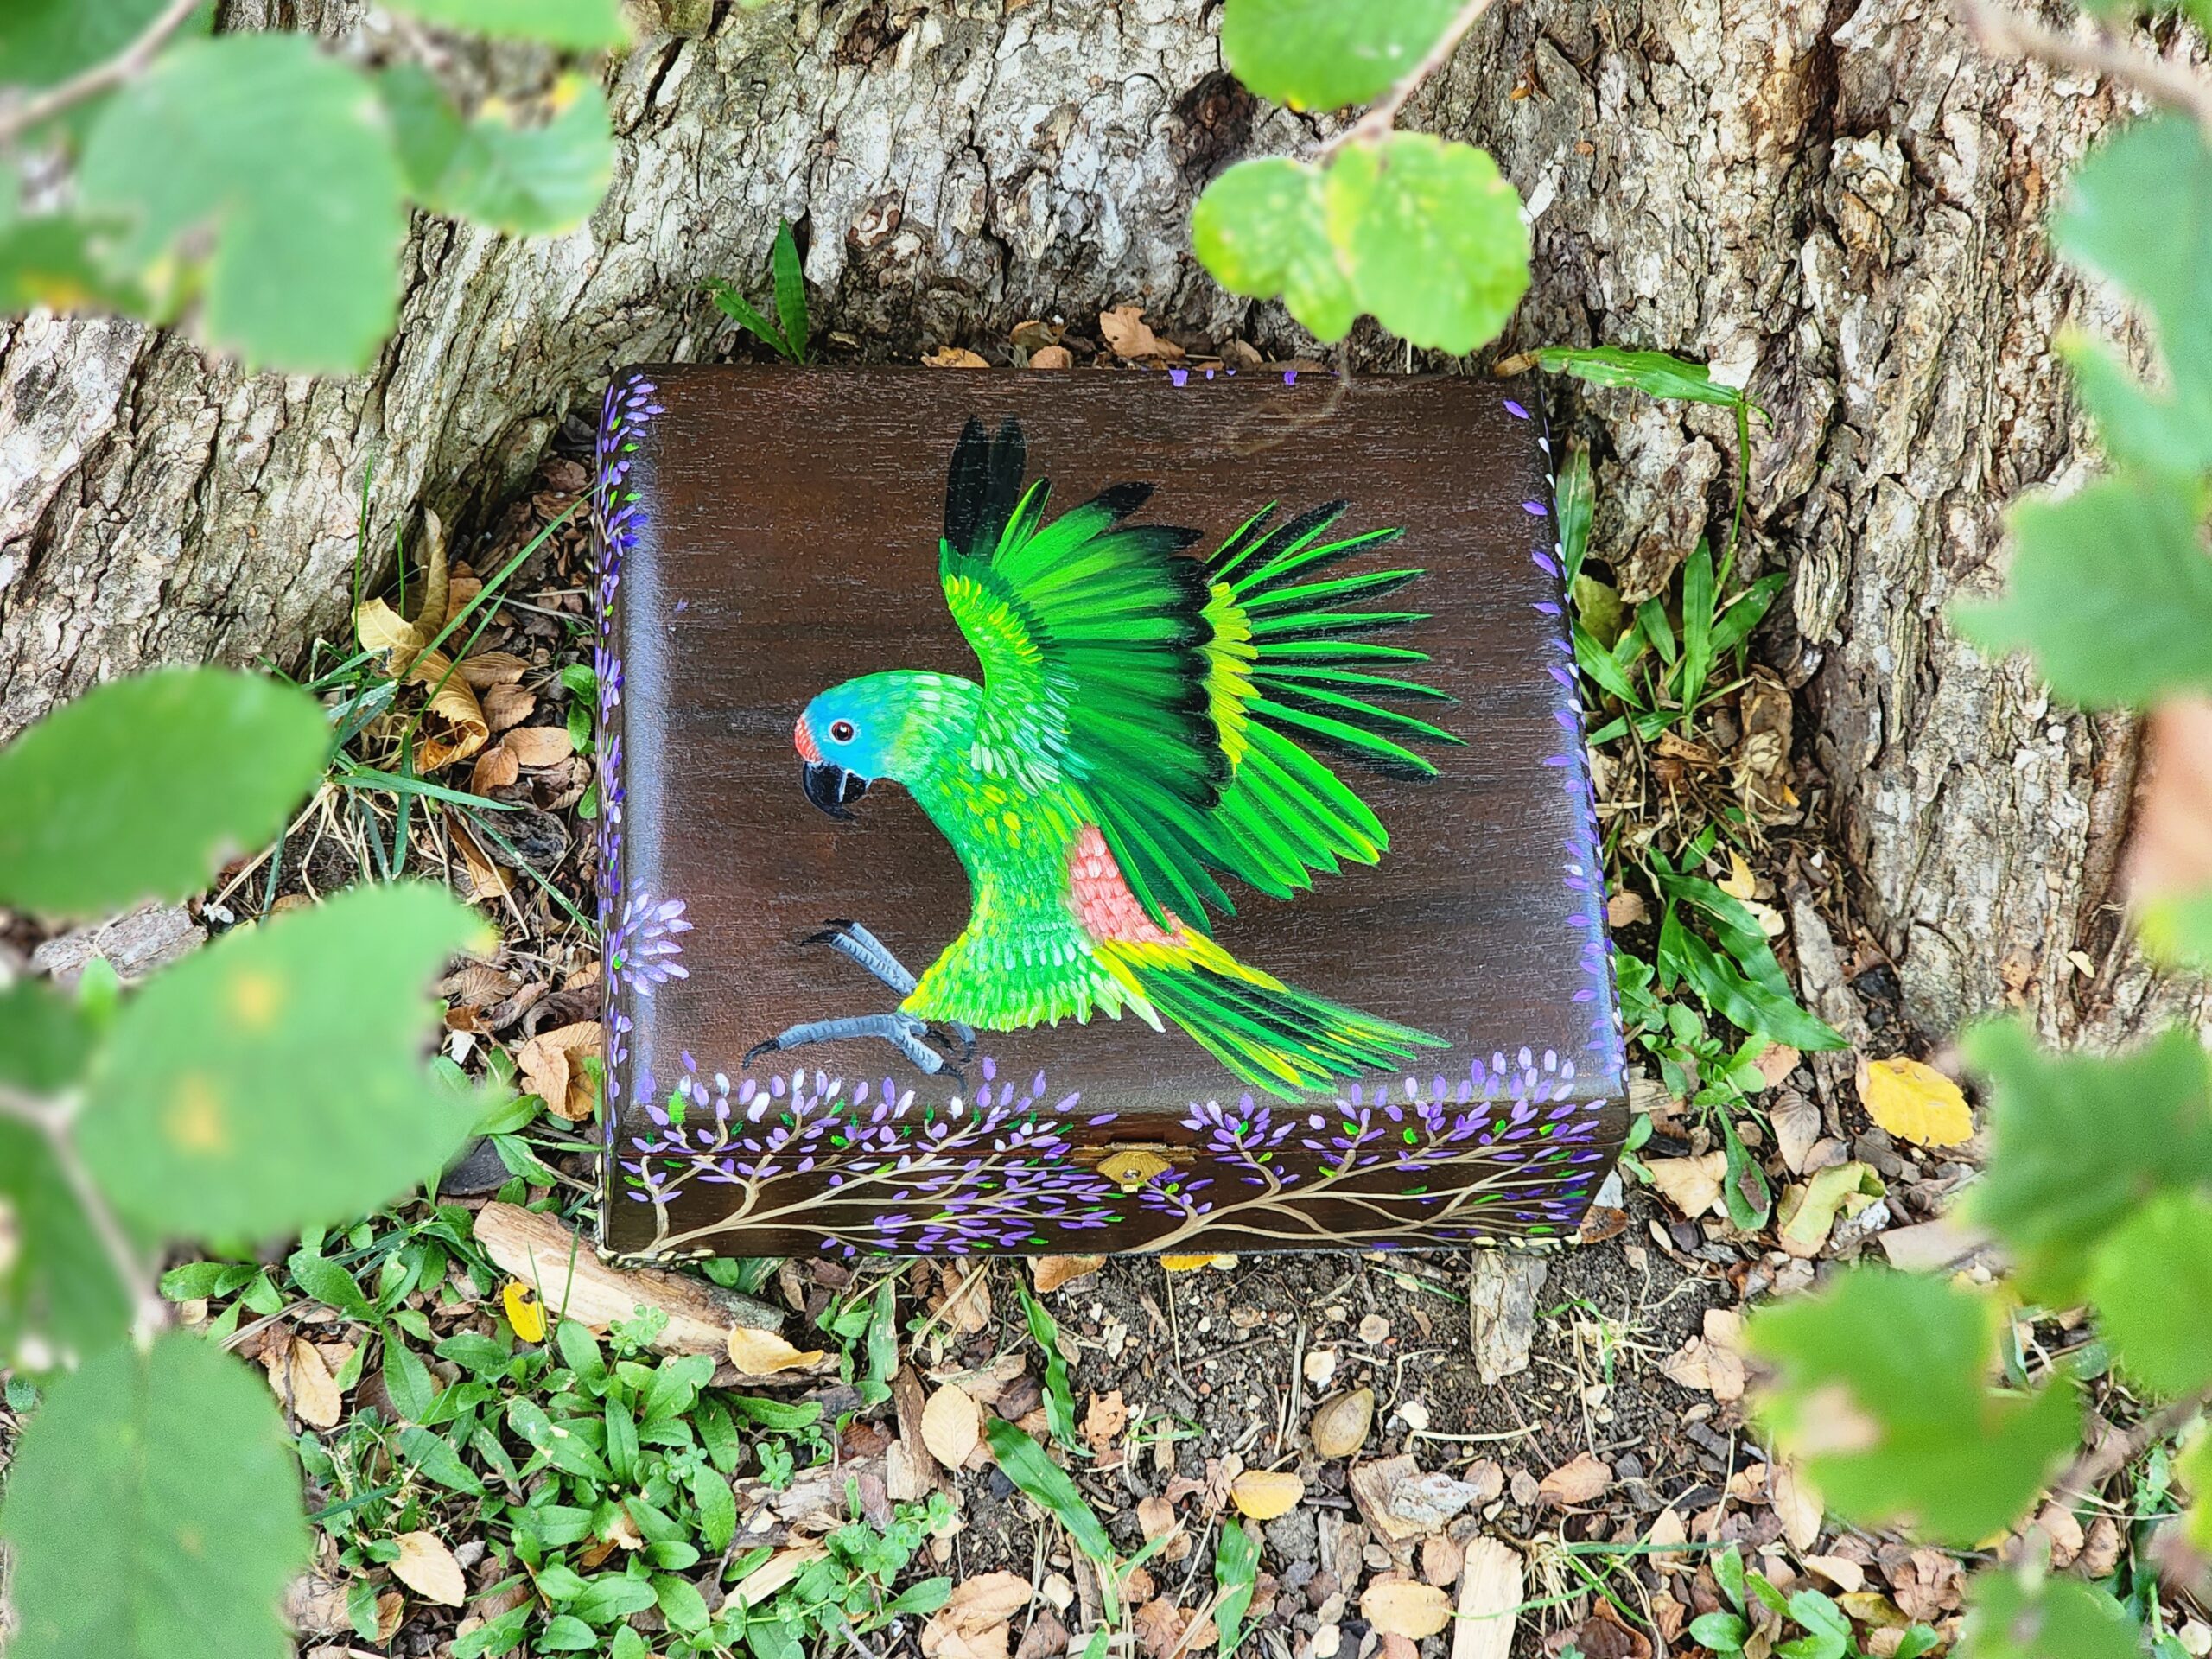 This is a one-of-a-kind beautiful handpainted trinket boxe with metal feet. This original cute trinket box is an ideal gift for a special loved one. You can store jewelry such as rings, necklaces, bracelets, or anything you would like to keep in a particular place, especially in this elegant and artistic trinket box.